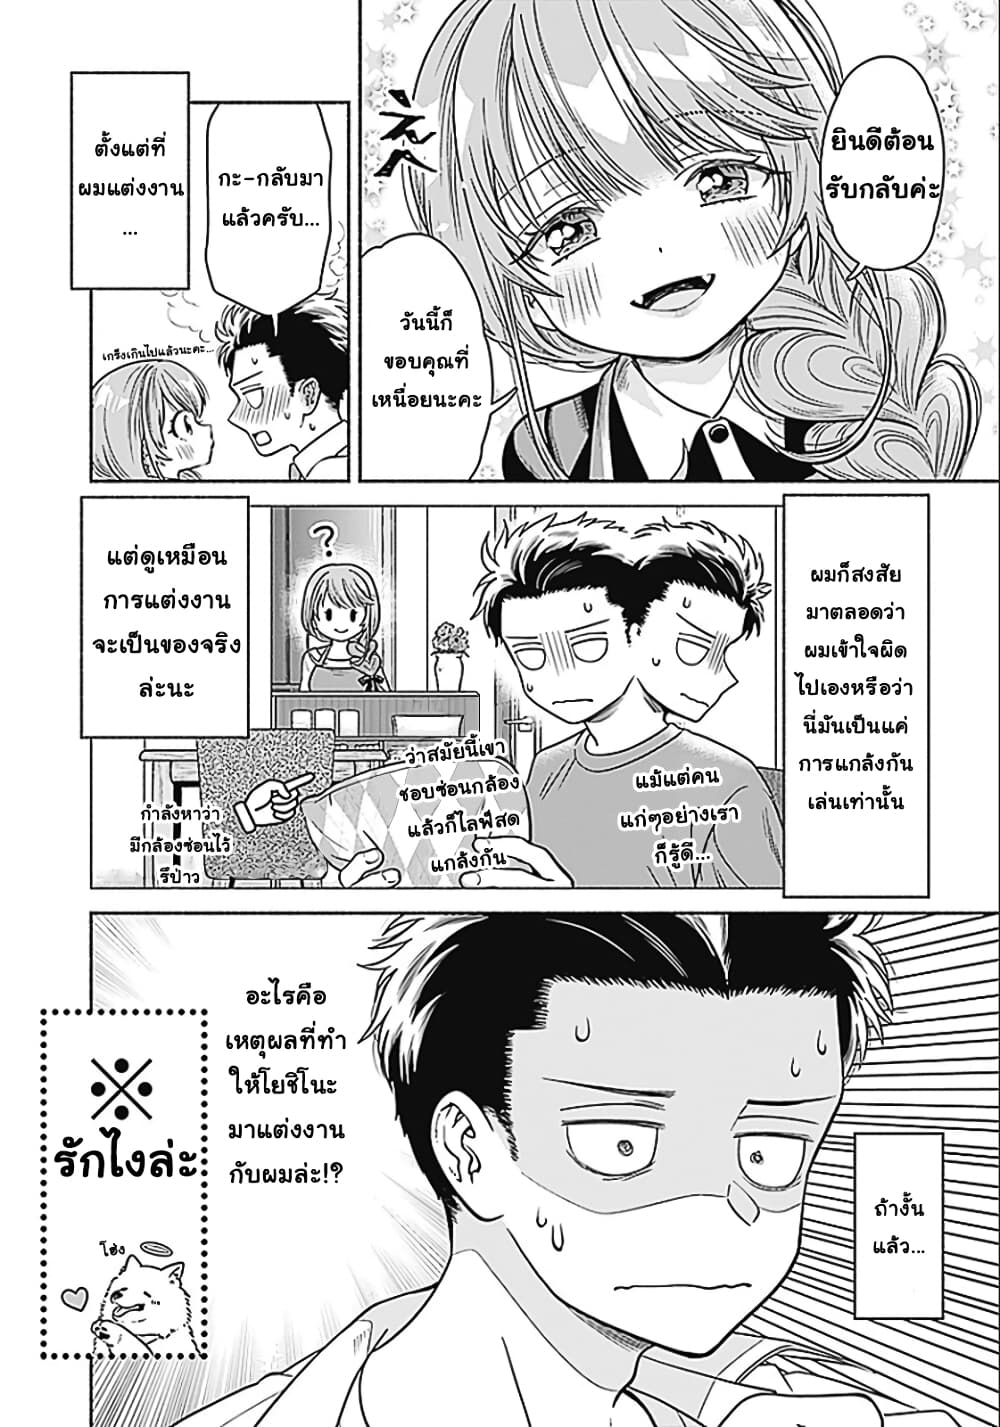 Marriage Gray 3-3